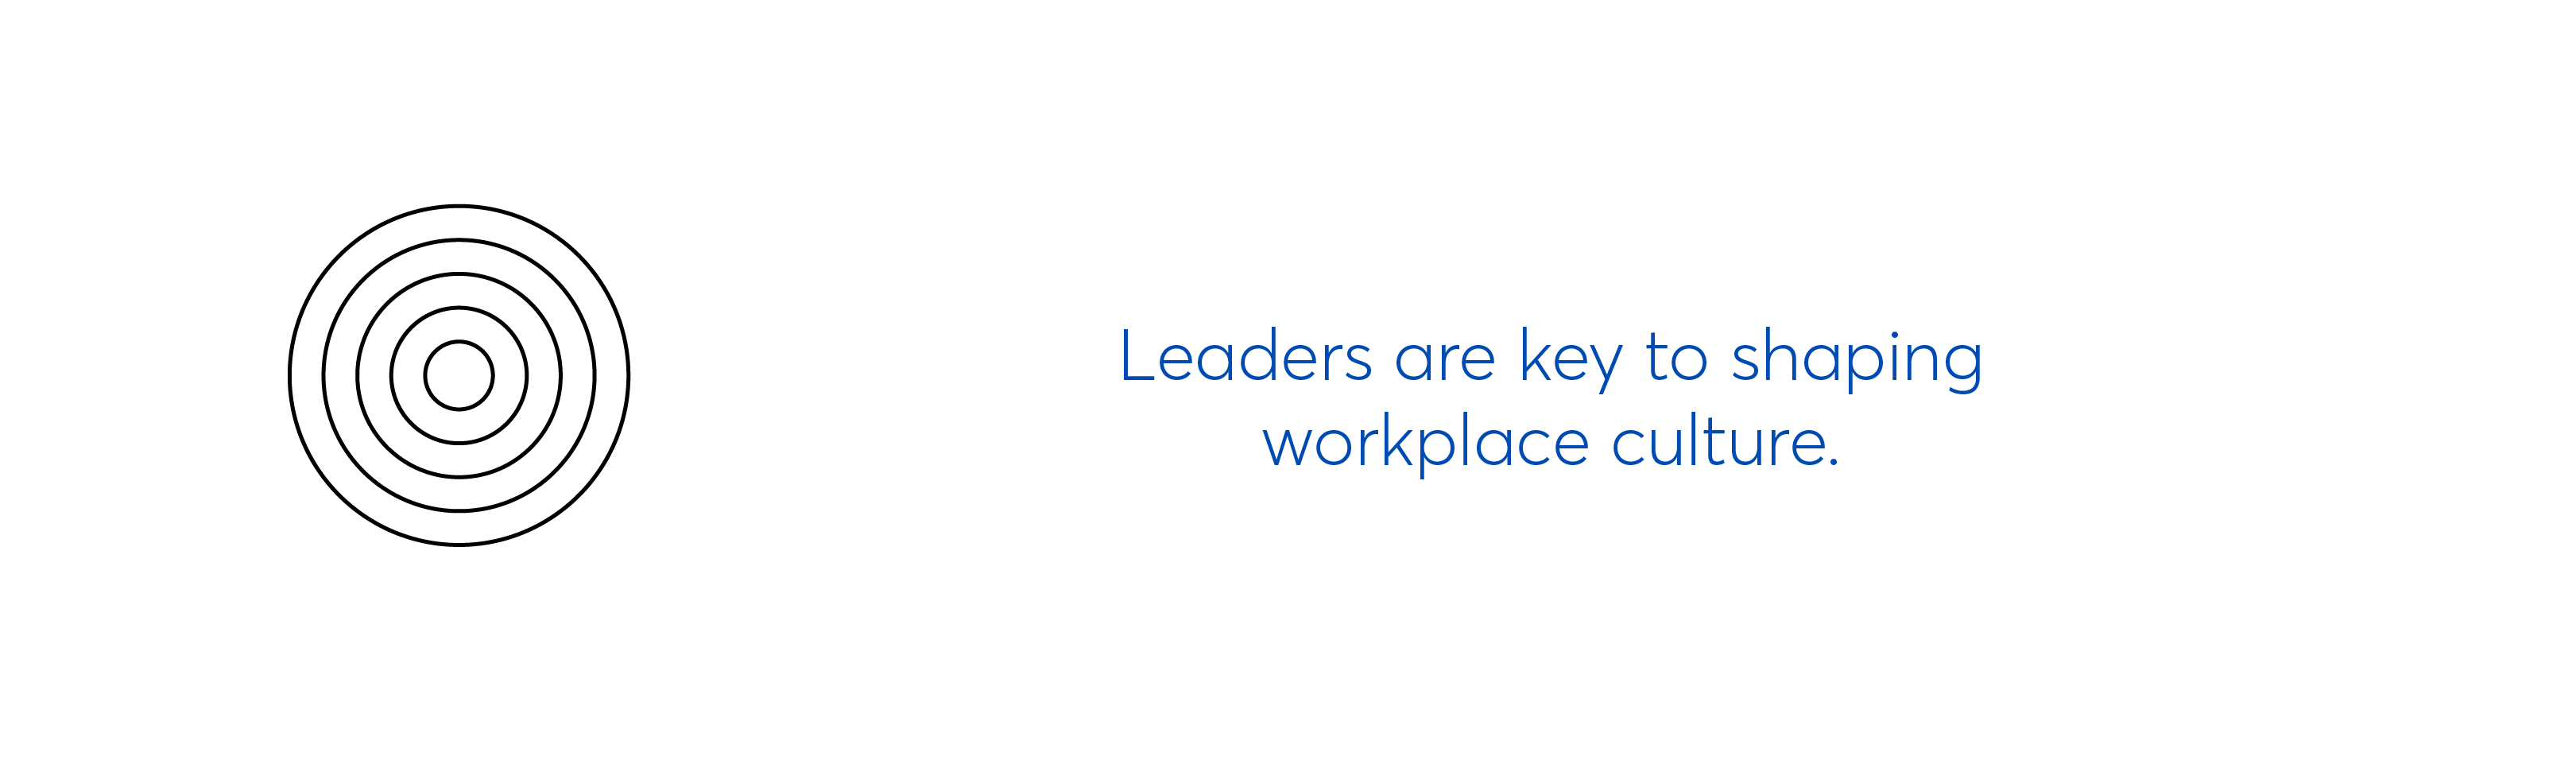 Leaders are key in shaping workplace culture